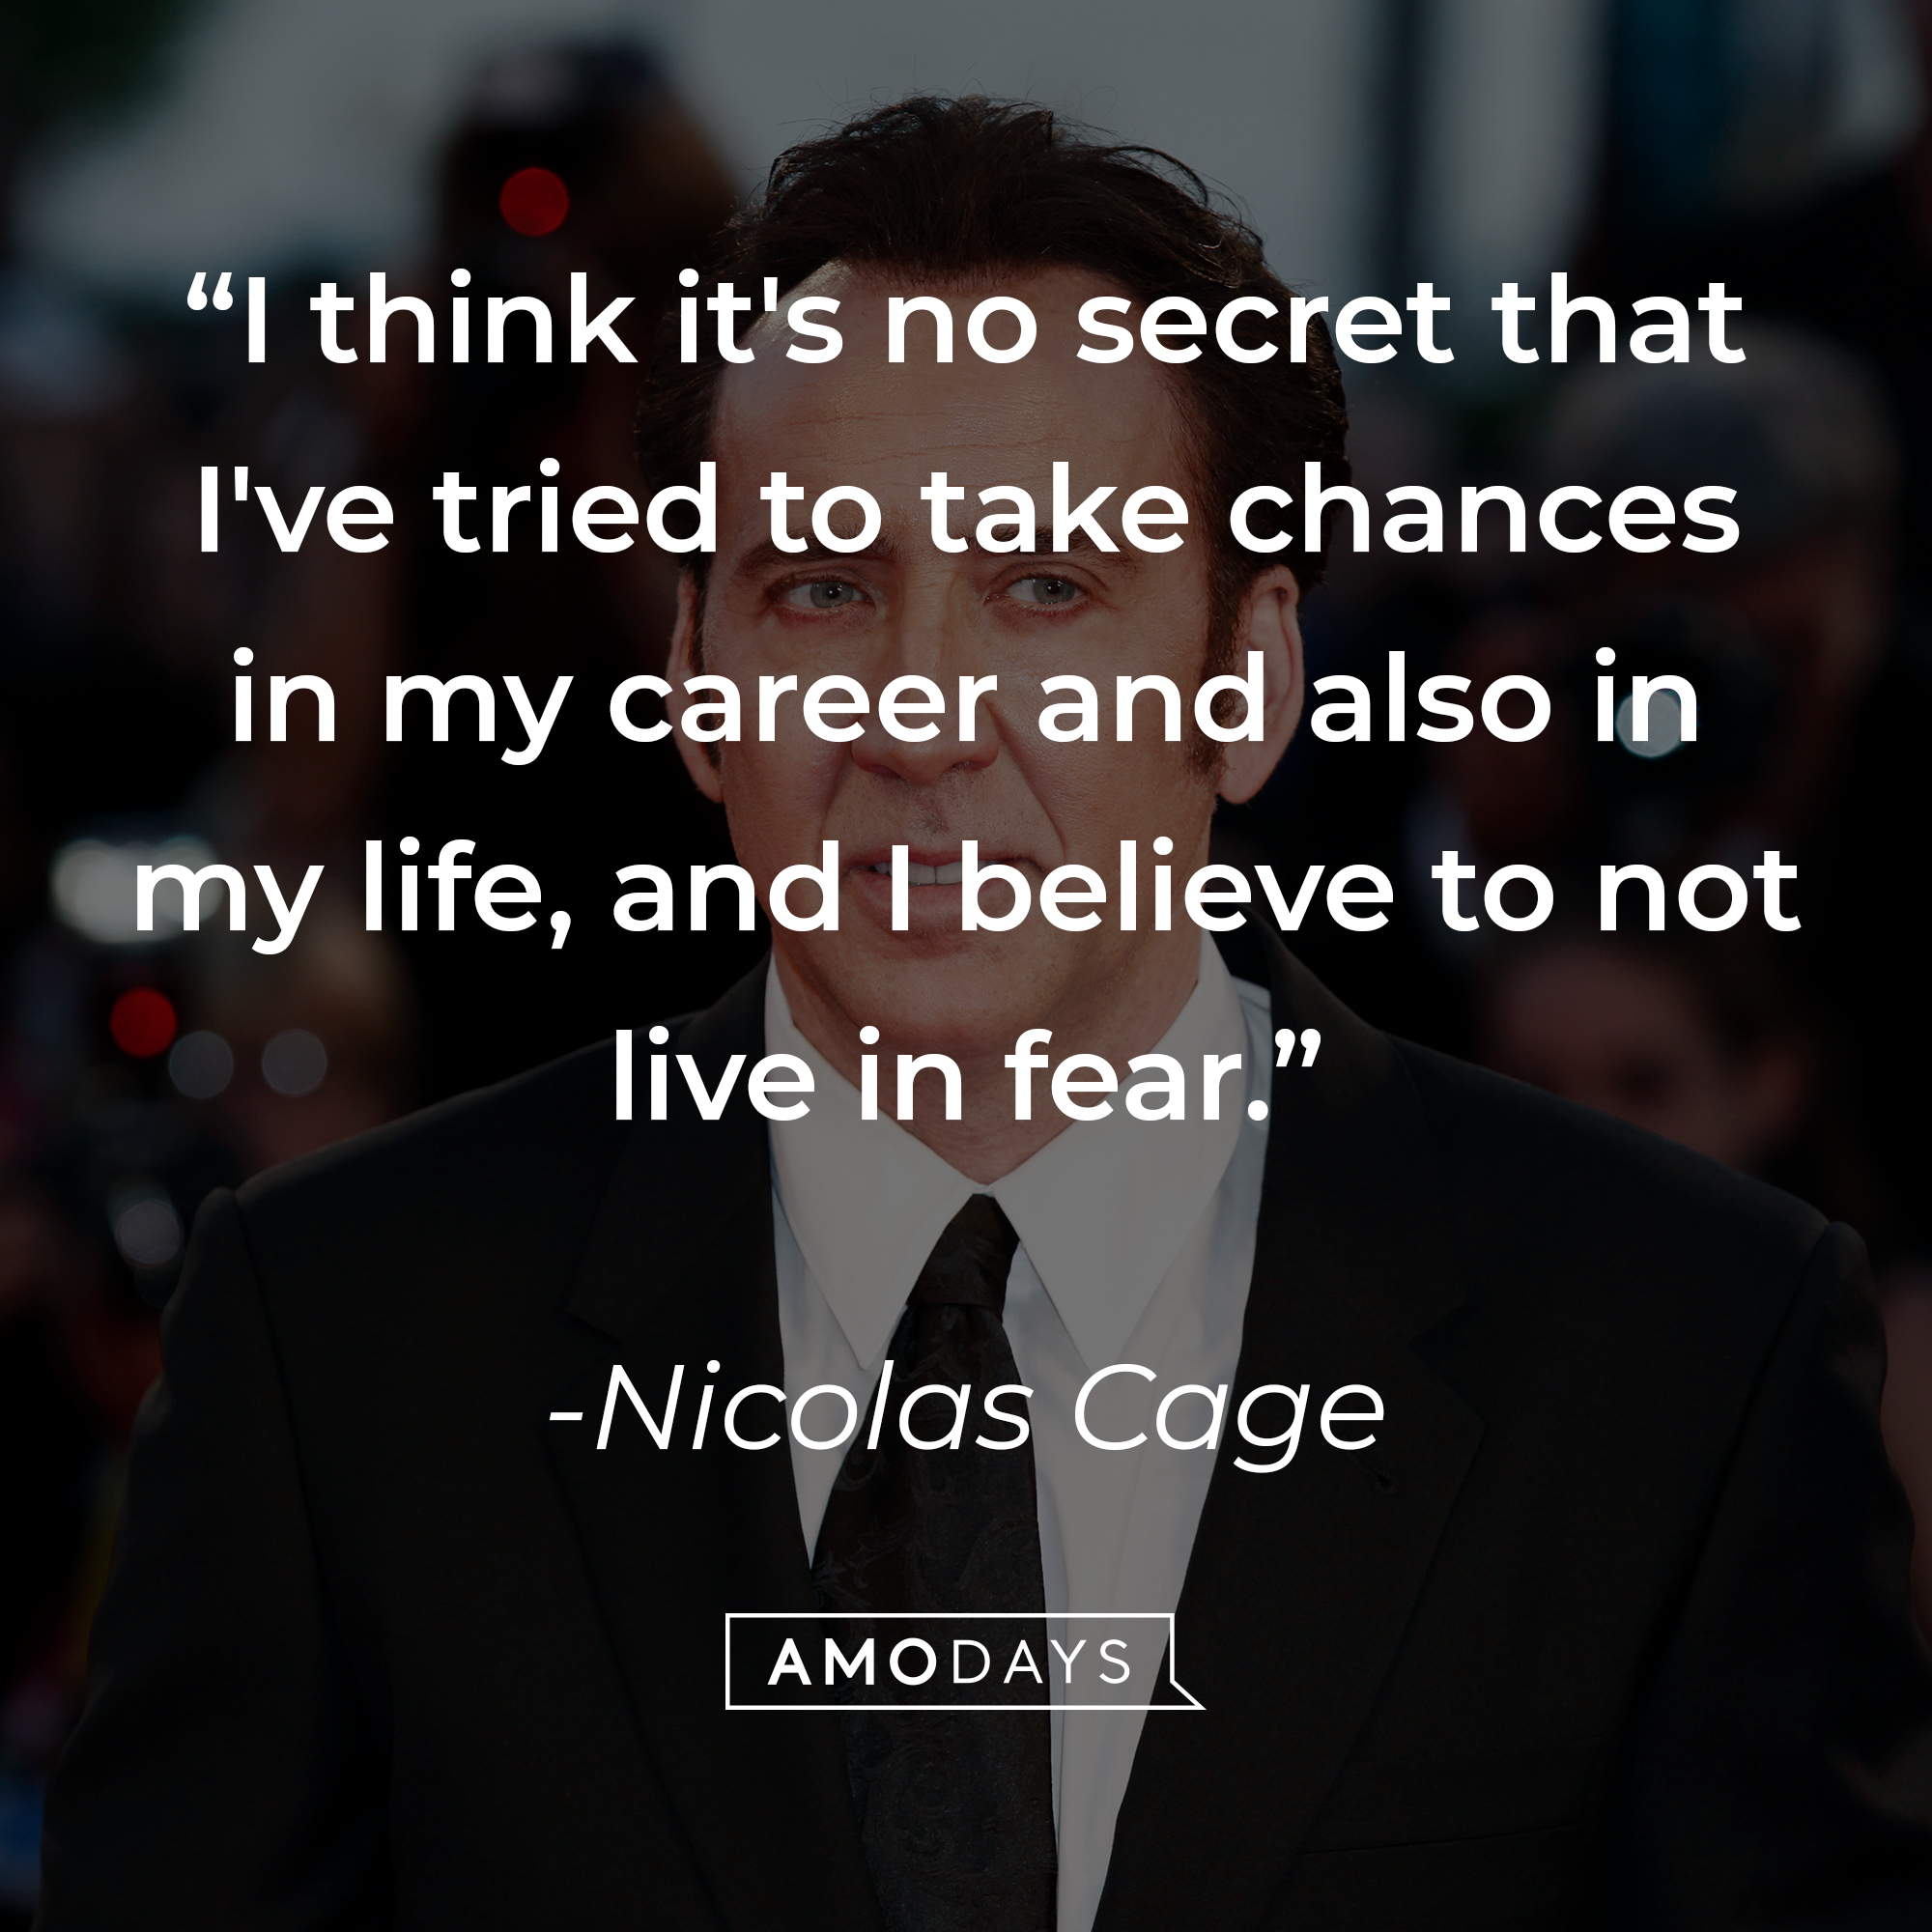 Nicolas Cage's quote: "I think it's no secret that I've tried to take chances in my career and also in my life, and I believe to not live in fear." | Source: Getty Images